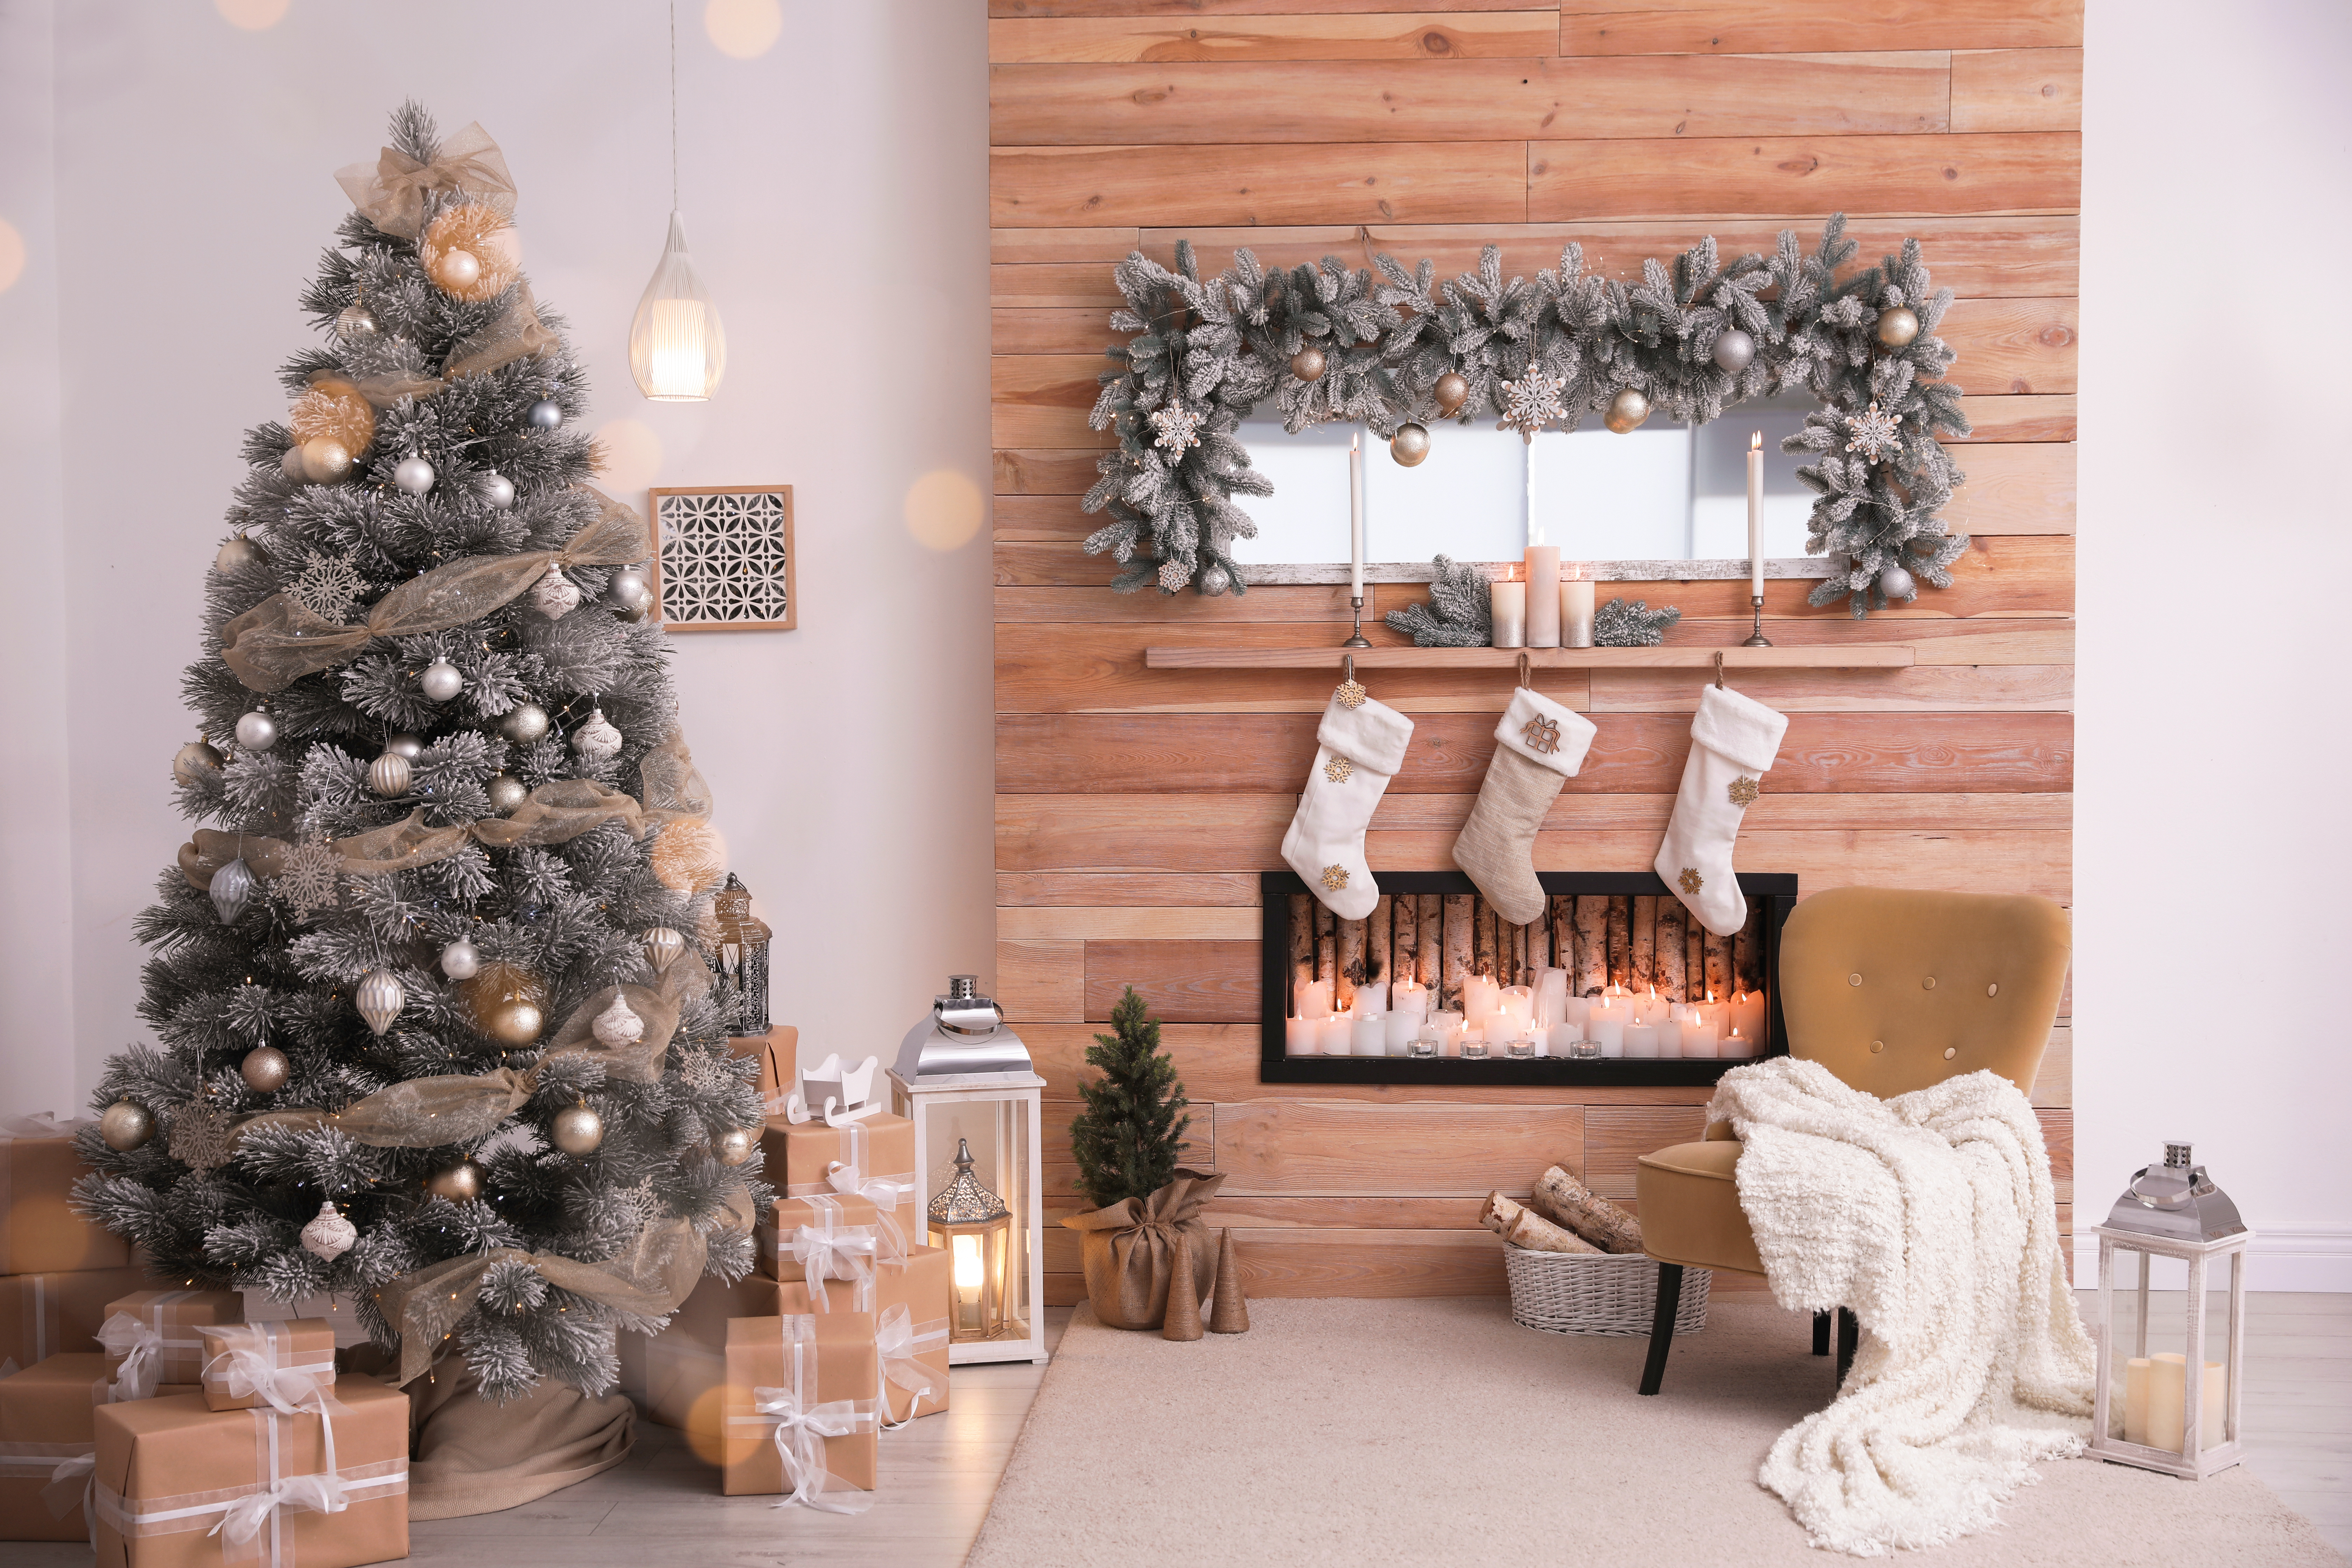 Staging Your Home to Sell: Should You Decorate for the Holidays?